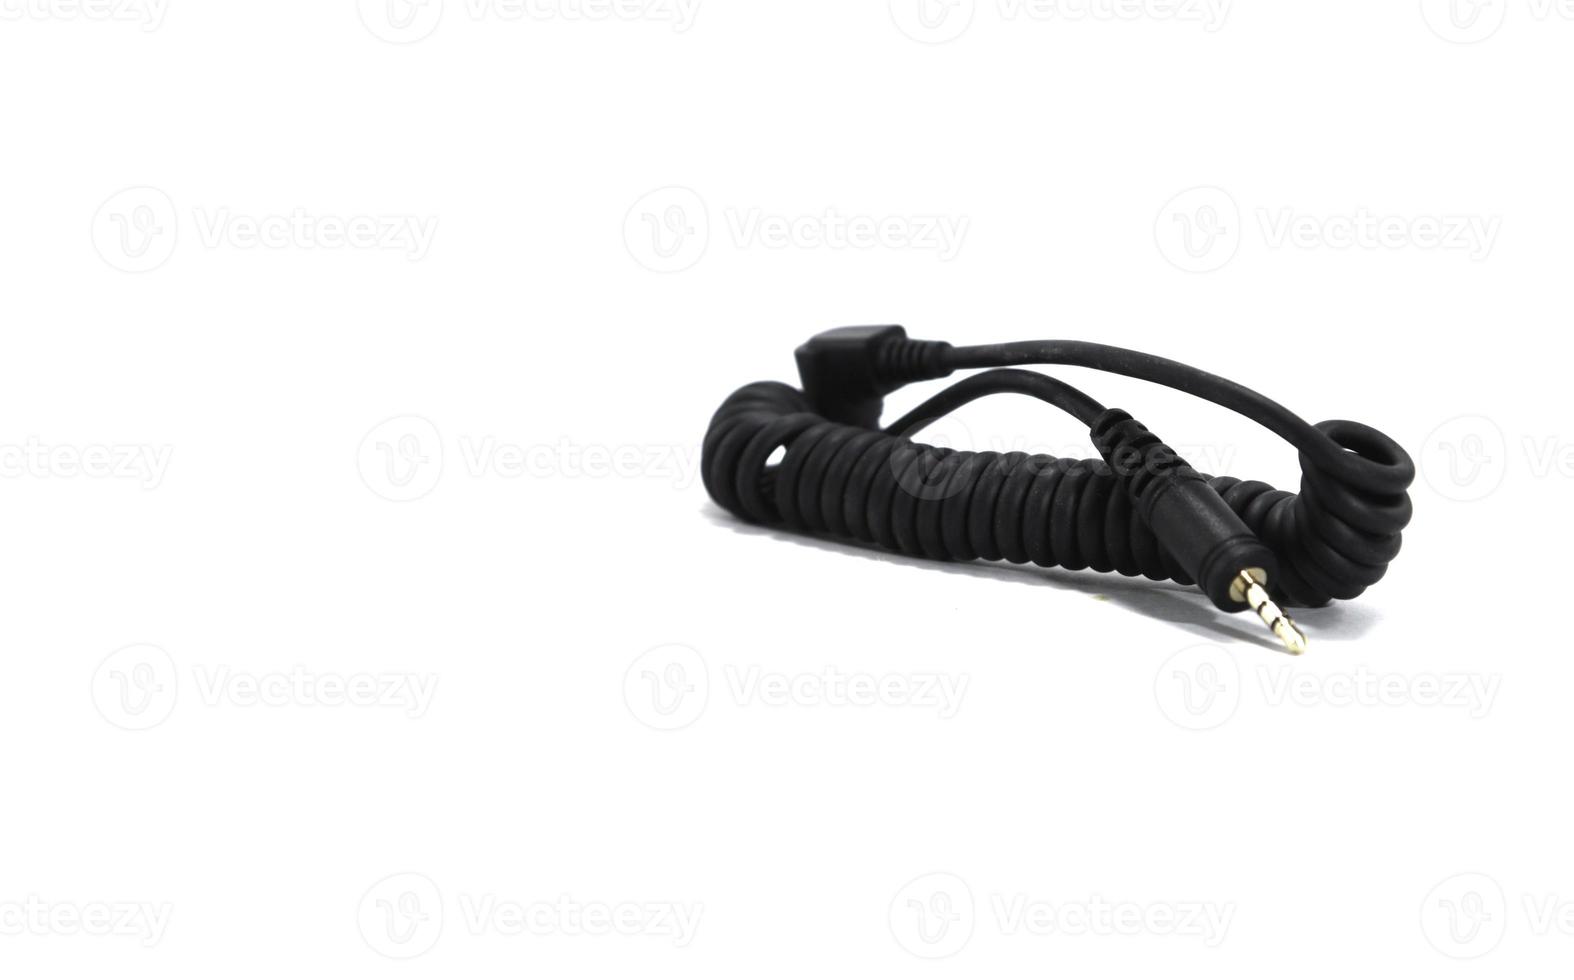 Cable for synchronizing the camera and flash on a white background. photo